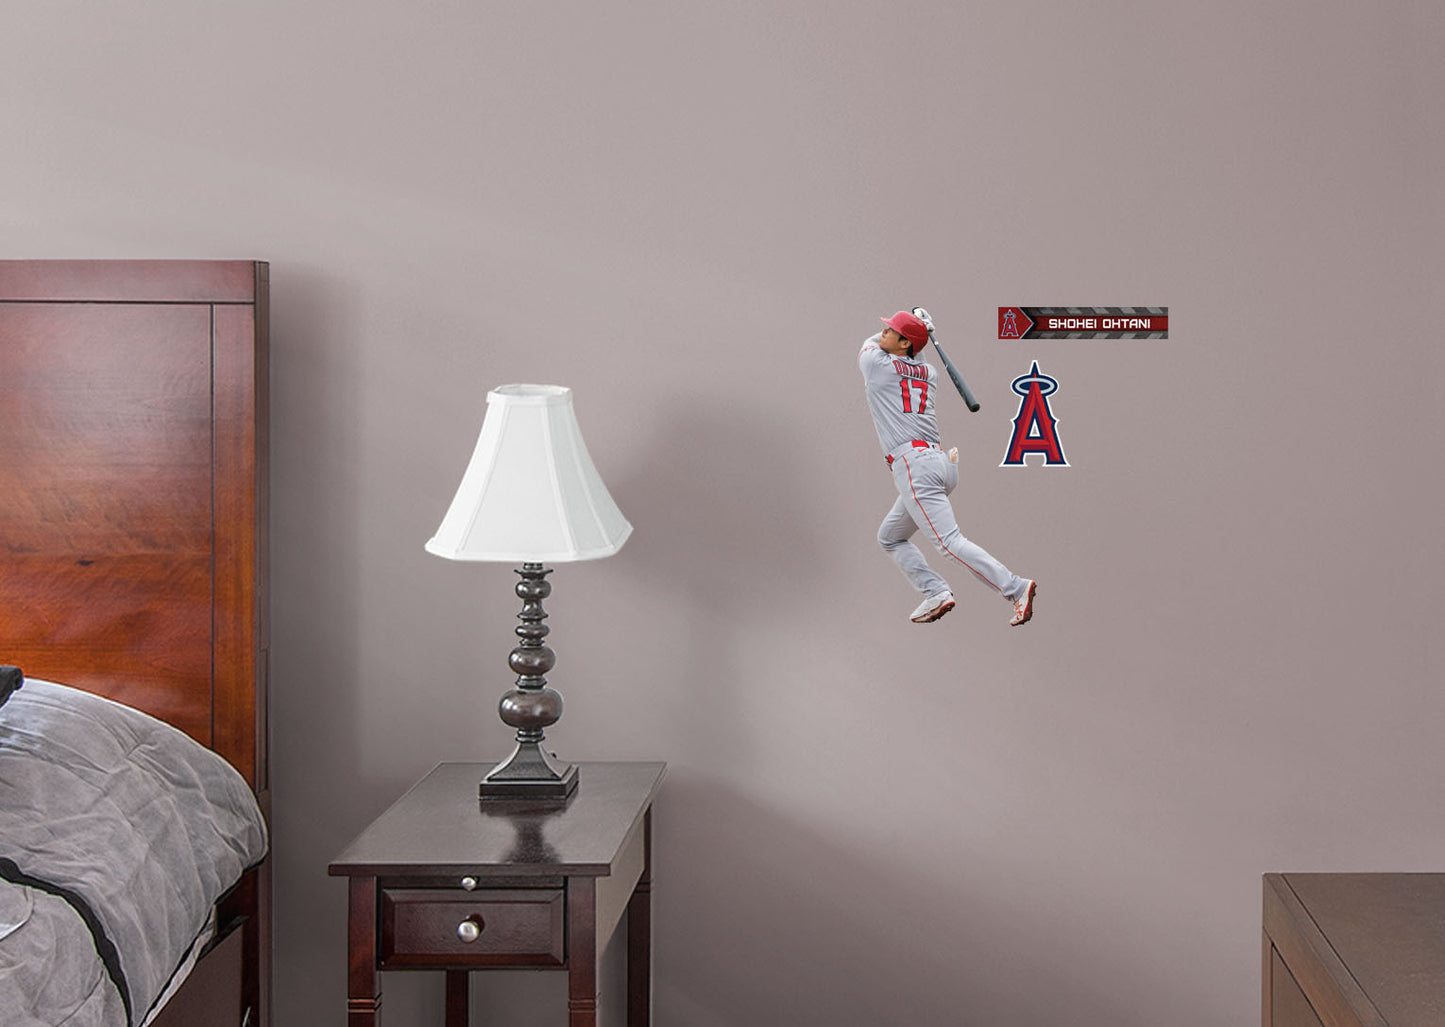 Los Angeles Angels: Shohei Ohtani 2021        - Officially Licensed MLB Removable Wall   Adhesive Decal